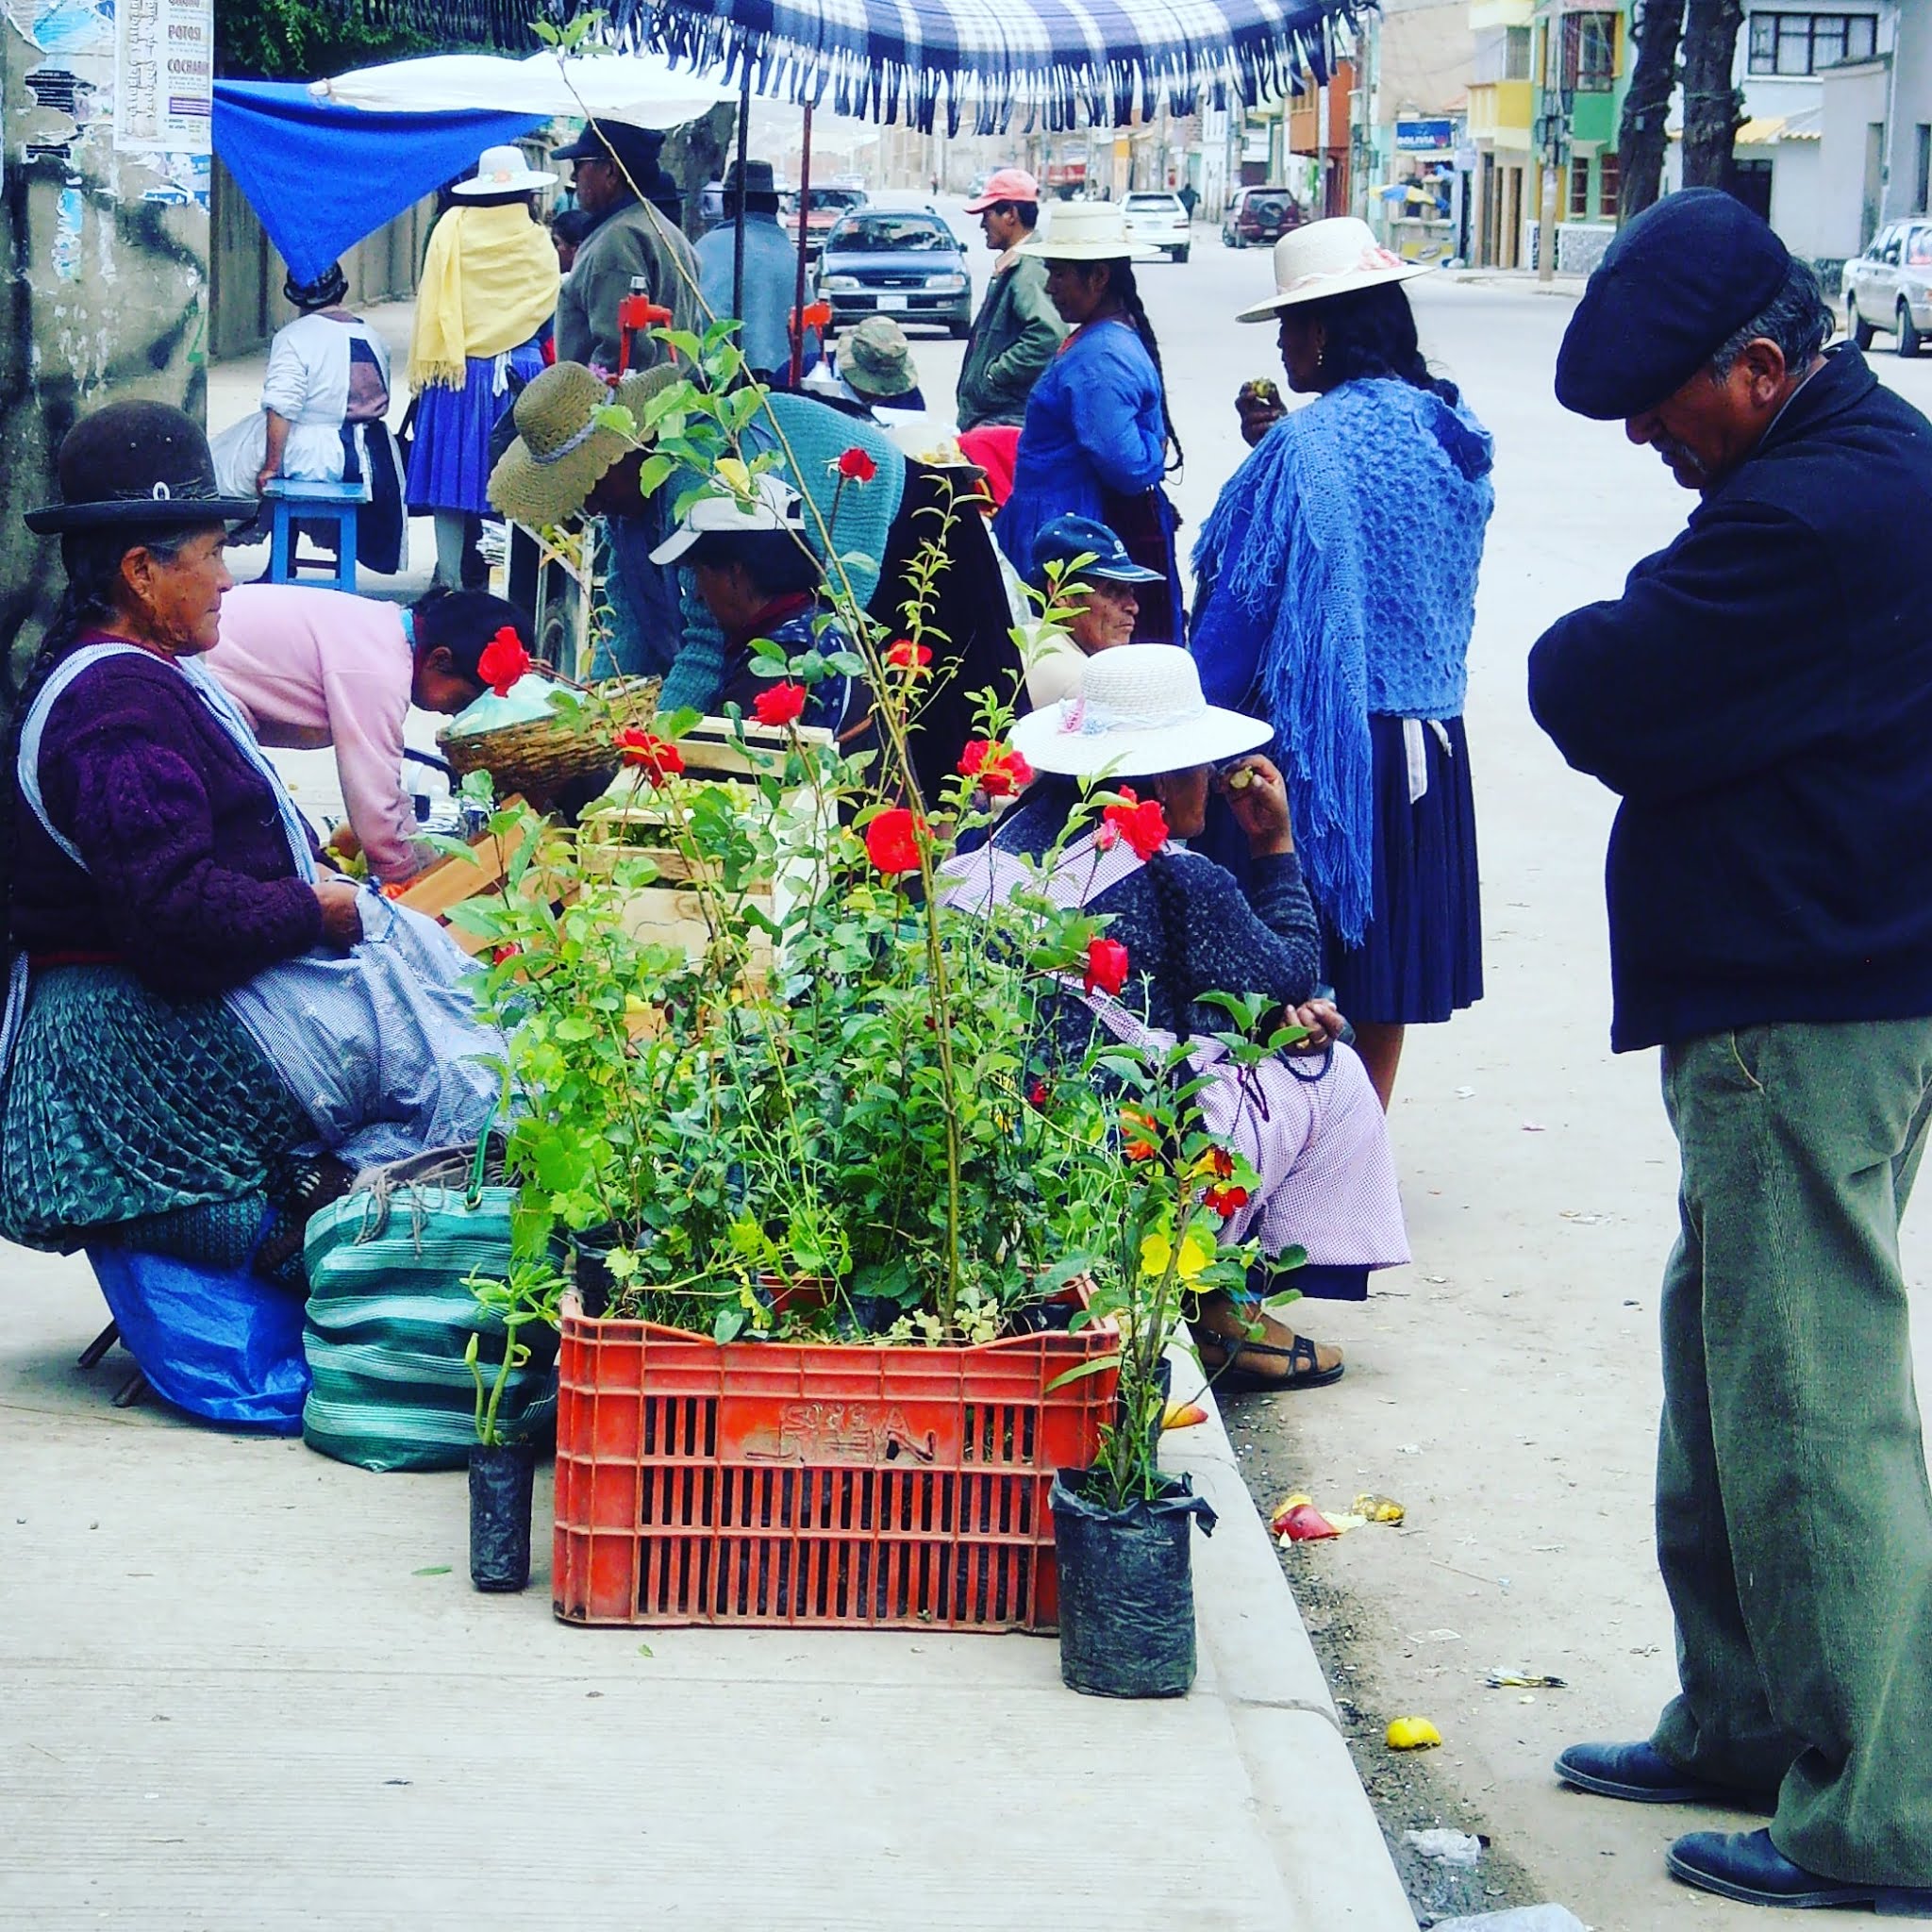 A woman dressed in typical bolivian dress in the city of Potosi. She's sitting in front of potted plants which she is selling